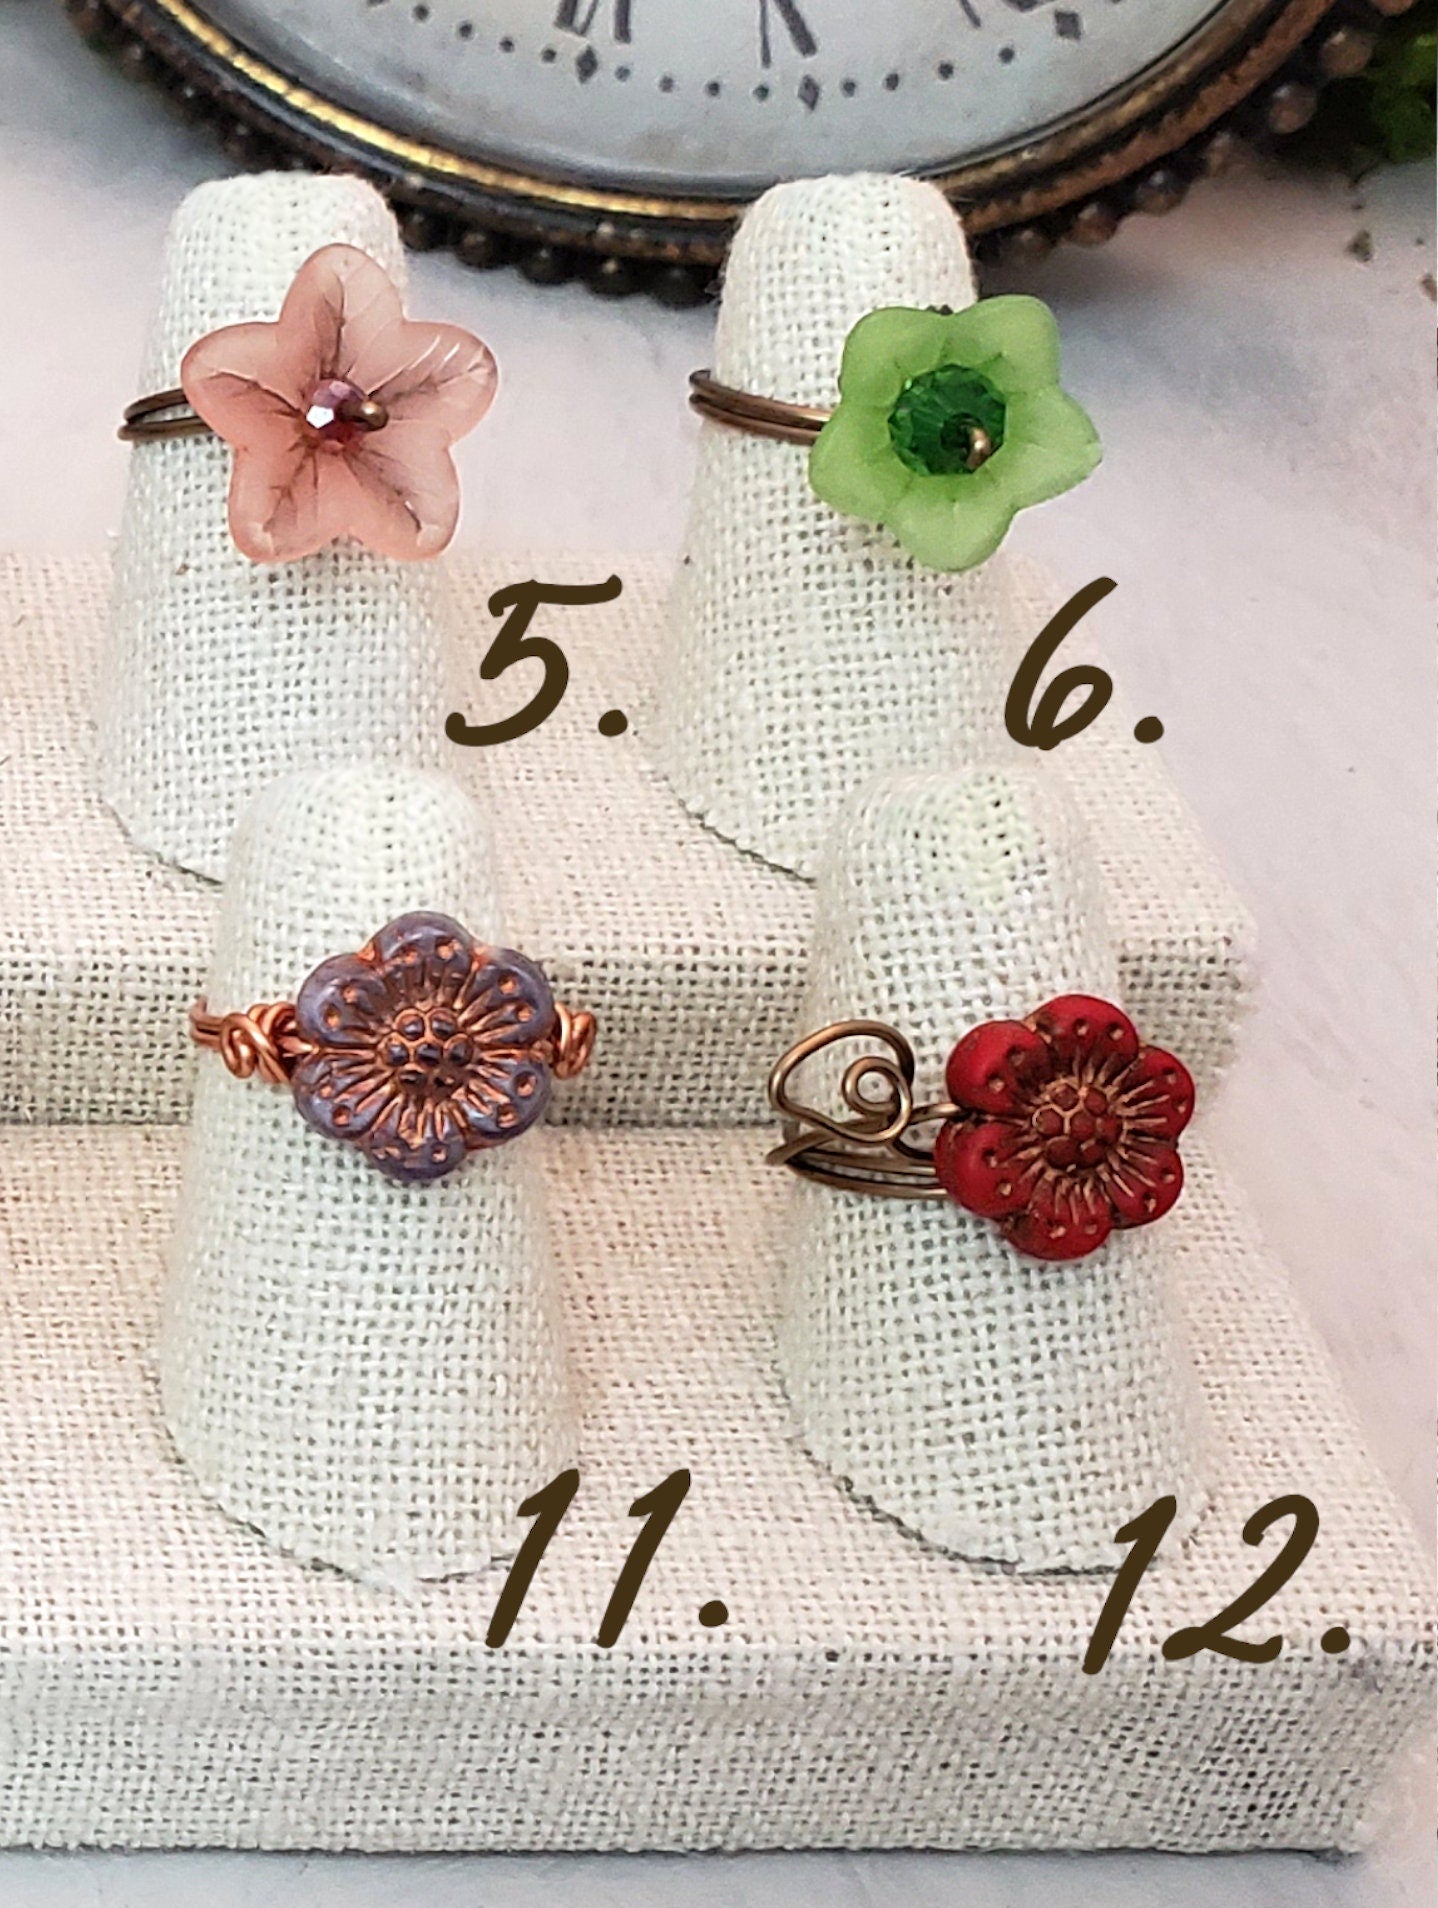 Flower Ring, Simple, Boho, Bohemian, Fairy Tale, Renaissance, Medieval, Garden, Wedding, Bridesmaid, Choice of Flowers and Metals, Lot A